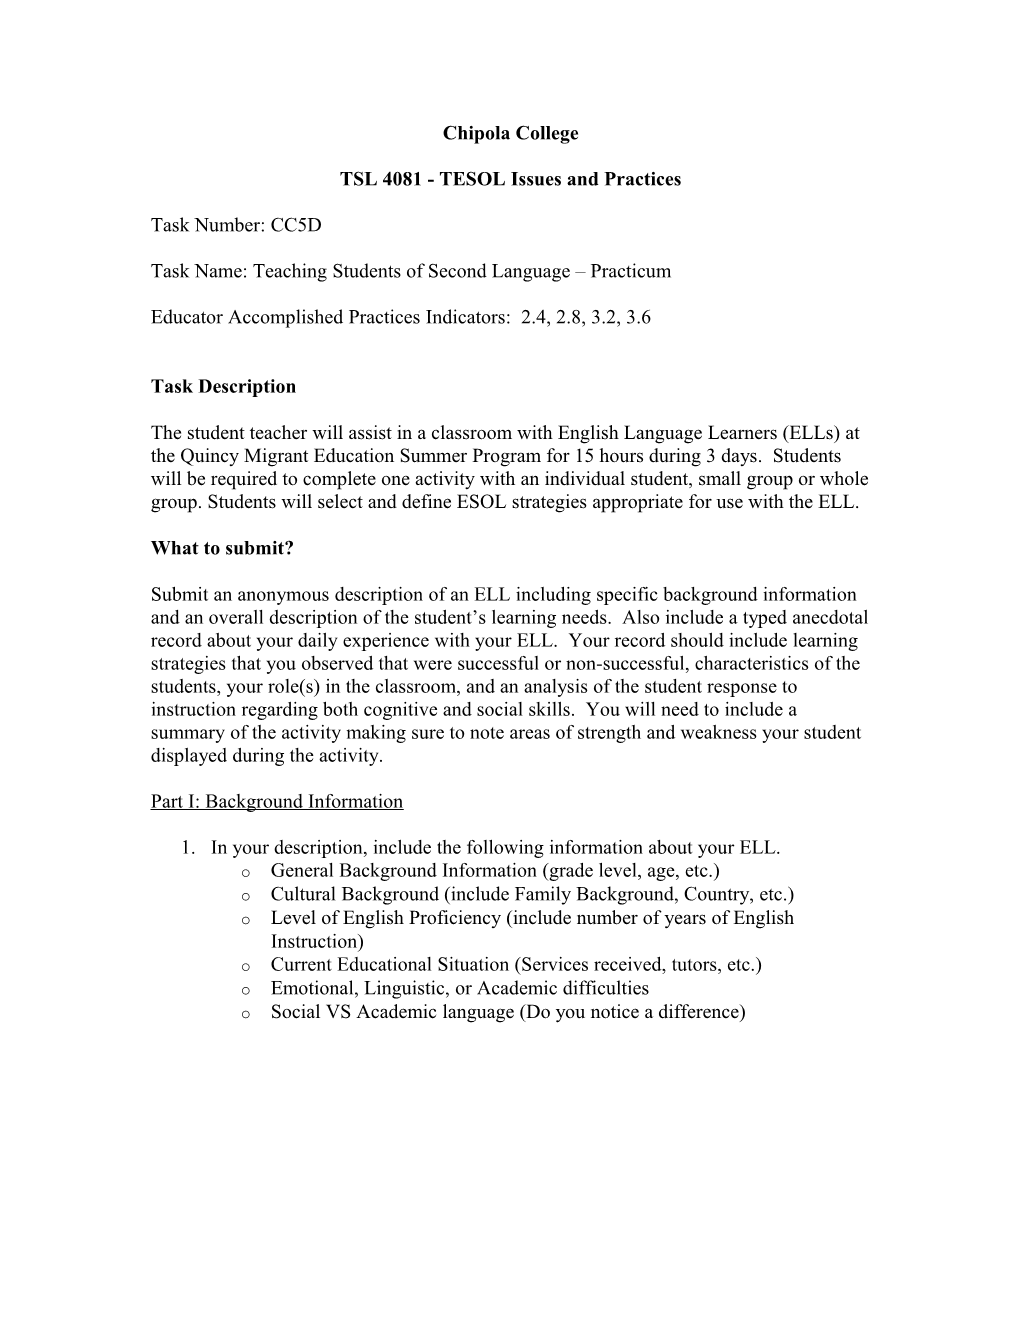 TSL 4081- TESOL Issues and Practices